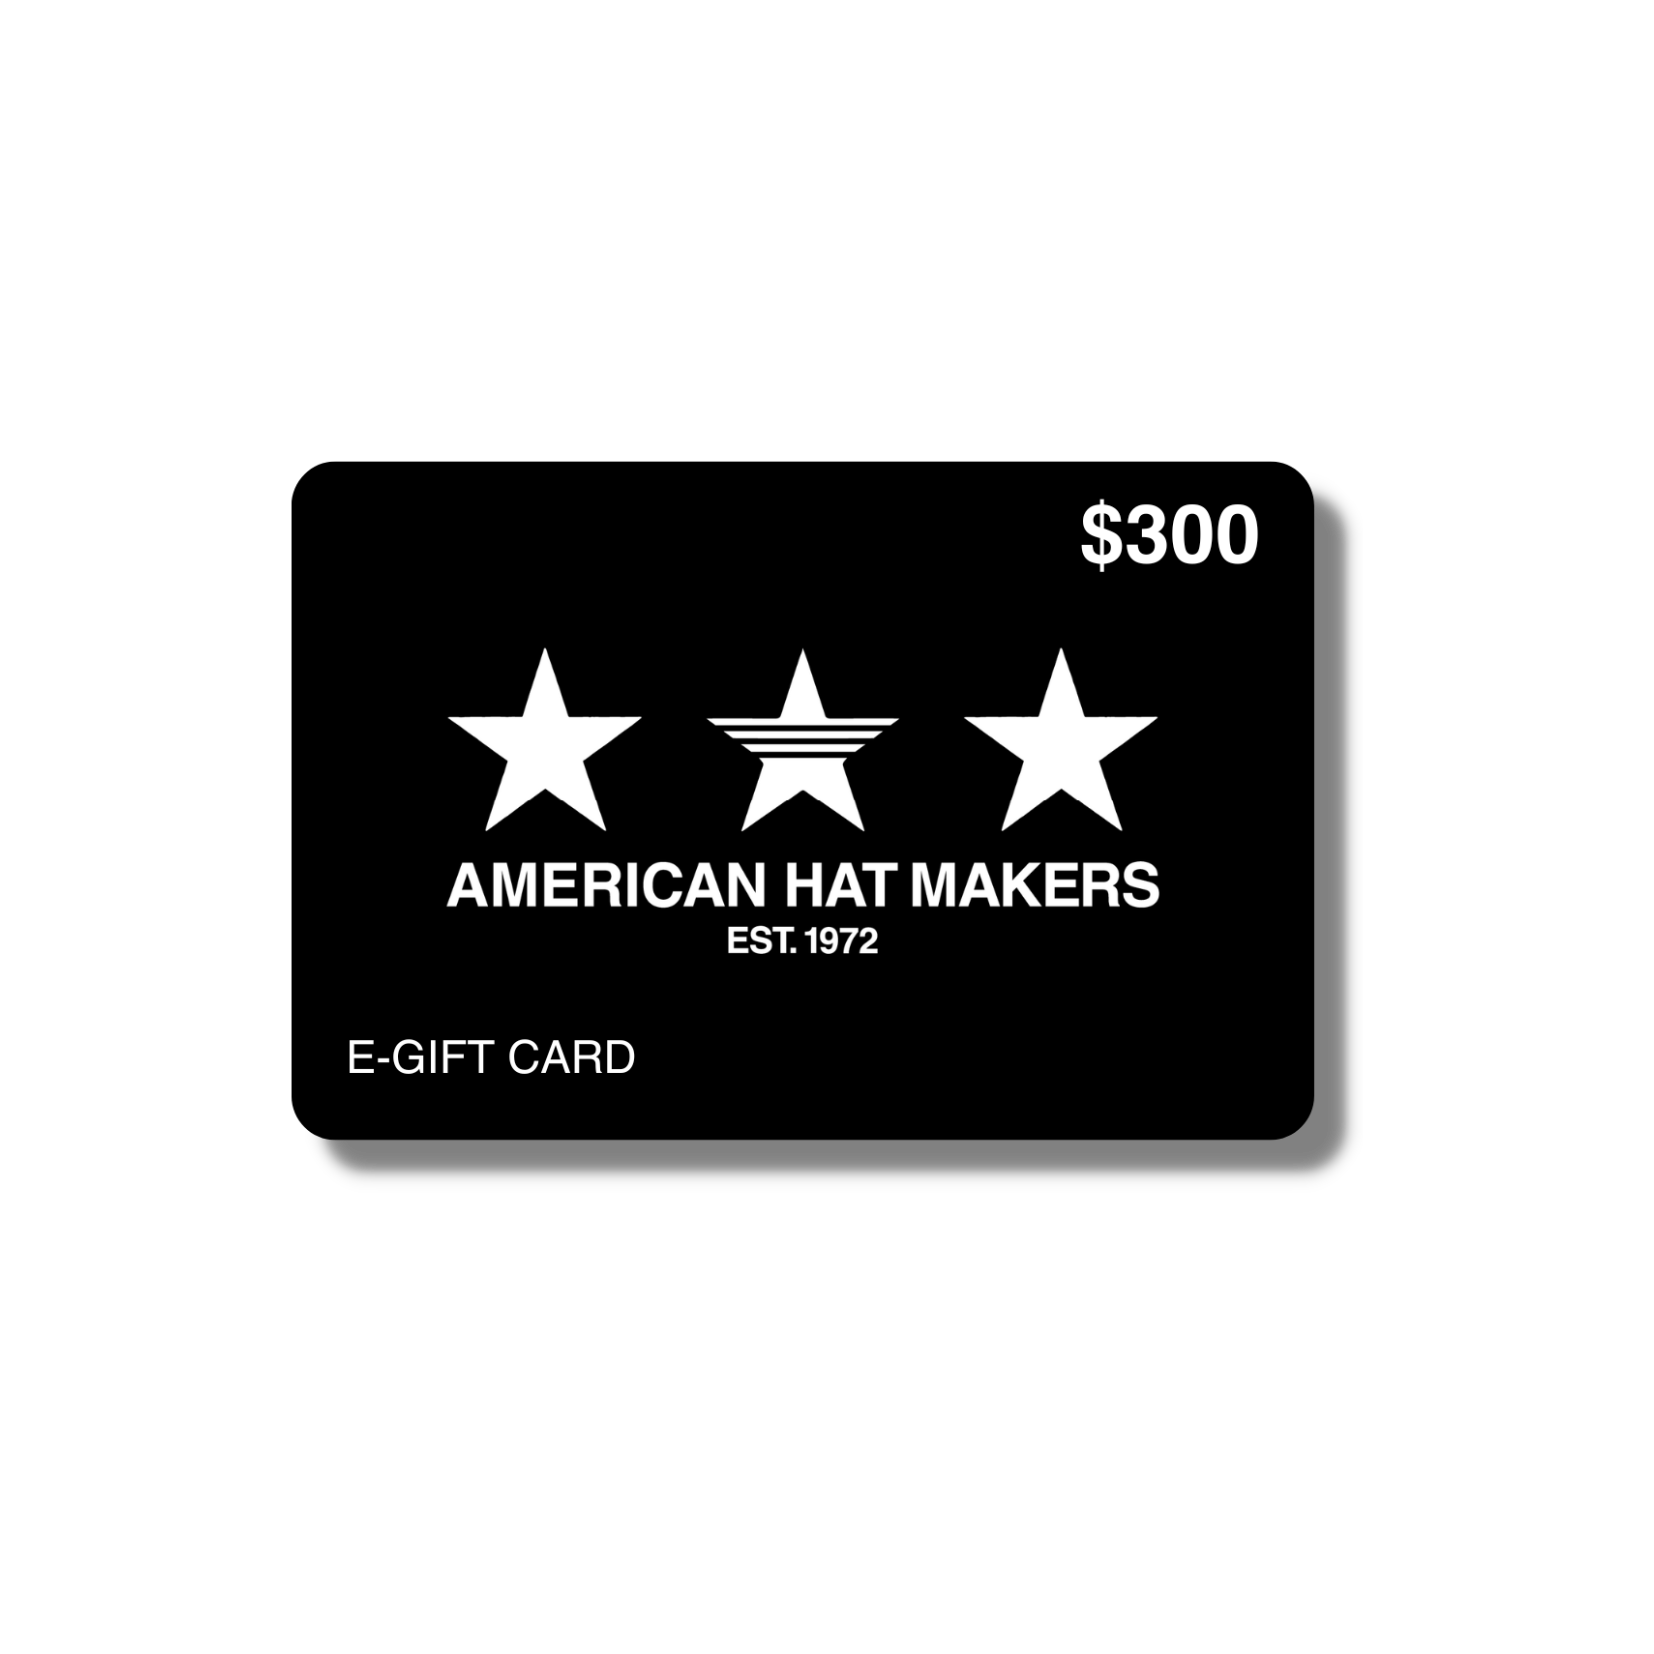 Electronic Gift Card amounting to $300 by American Hat Makers